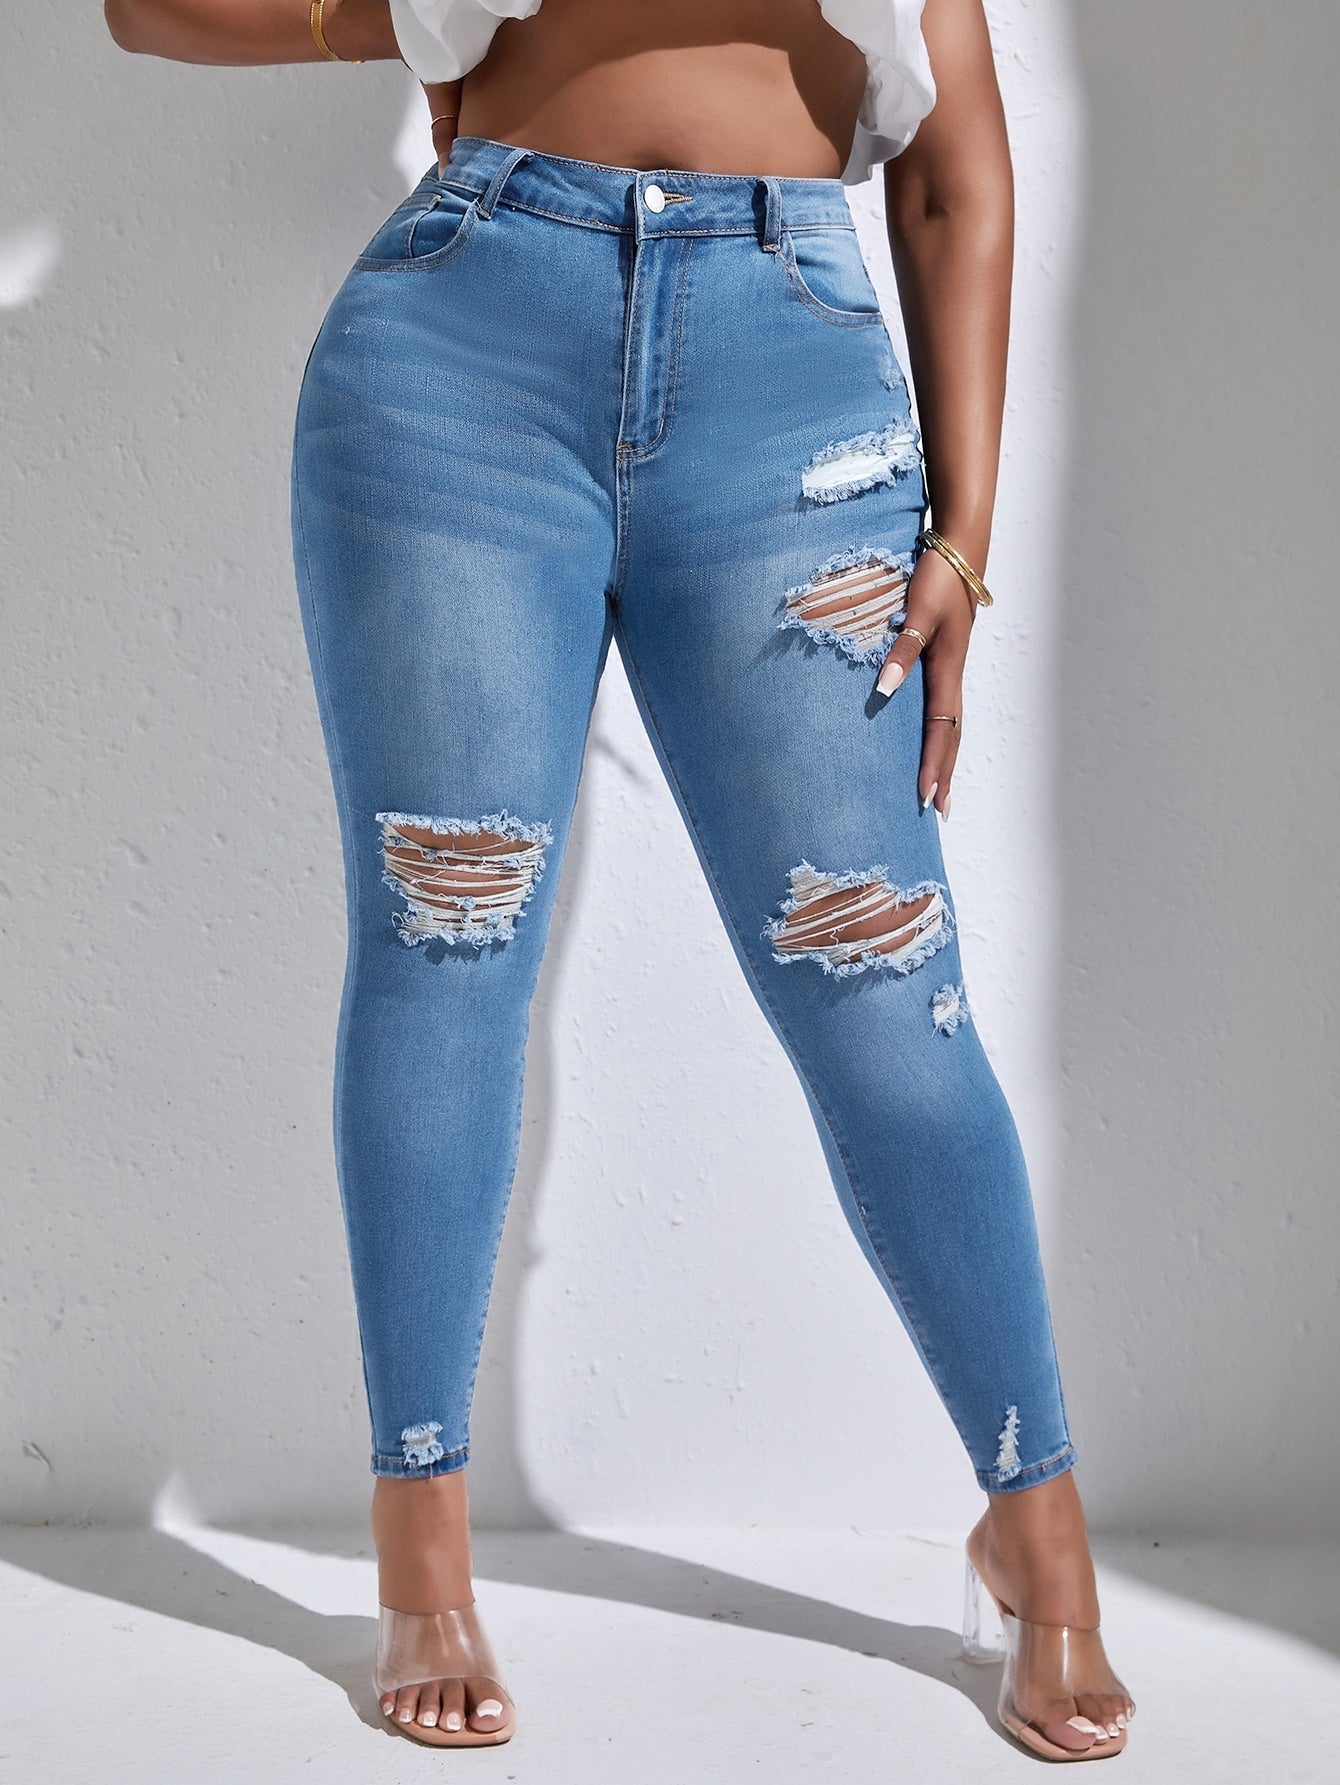 Plussize Schmale Jeans mit Riss, hoher Taille